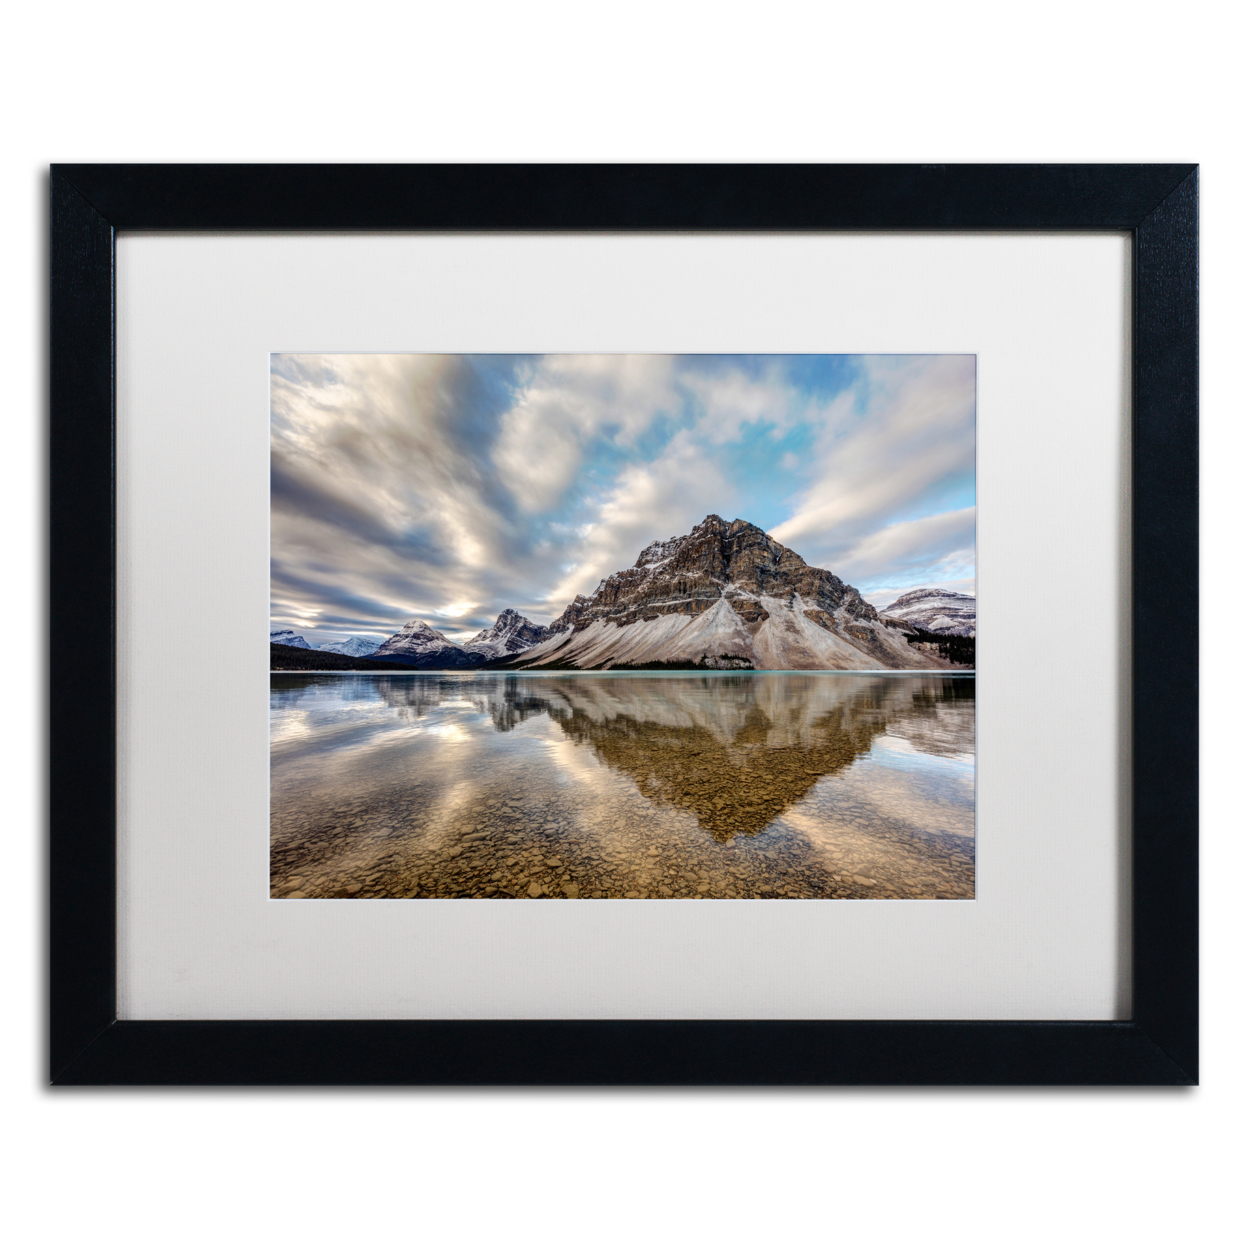 Pierre Leclerc 'Bow Lake Reflection' Black Wooden Framed Art 18 X 22 Inches